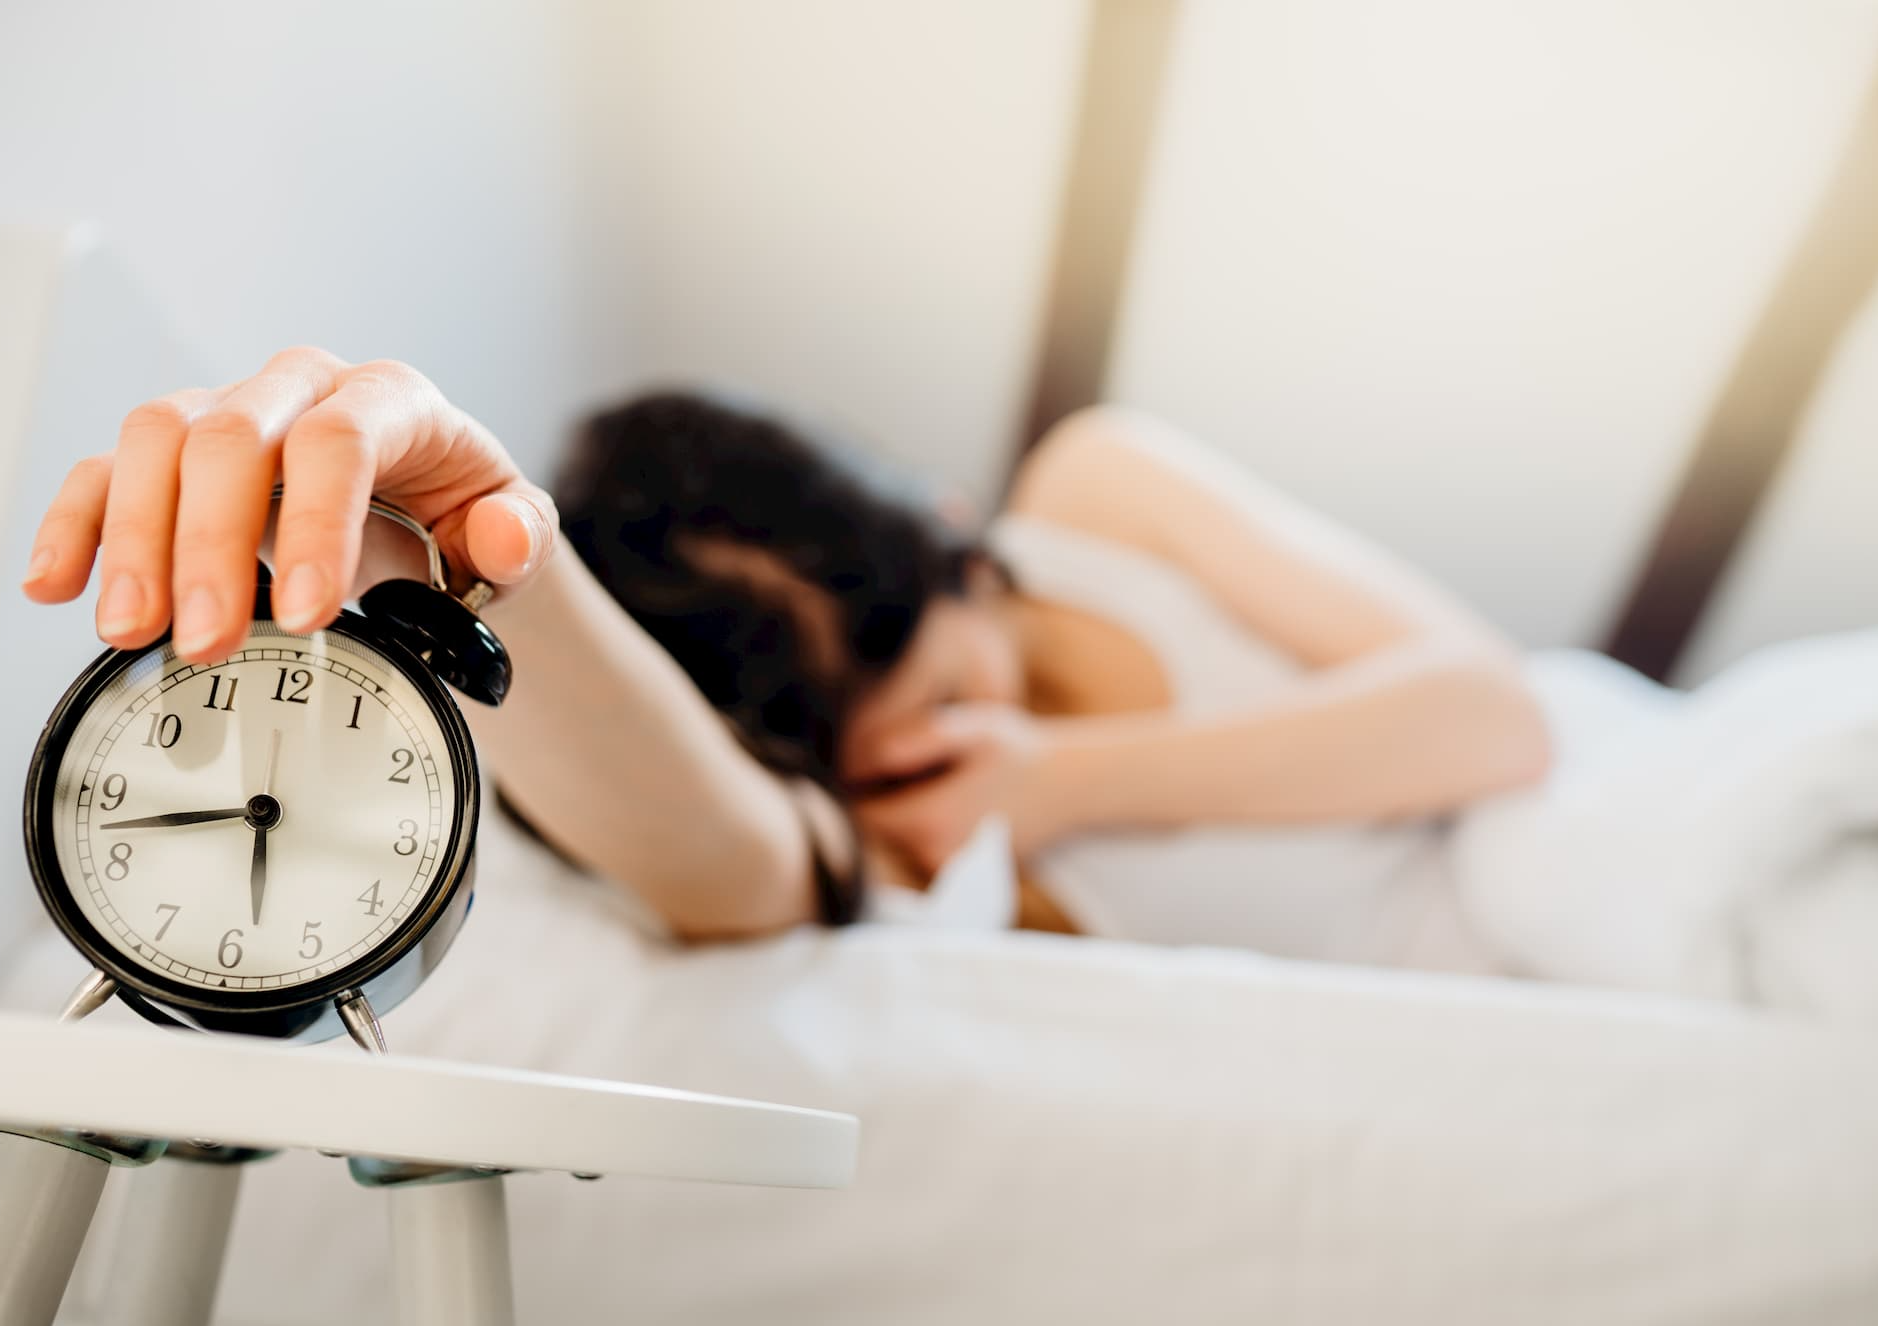 Minding Your Mental Health During the Pandemic: Sleep Hygiene